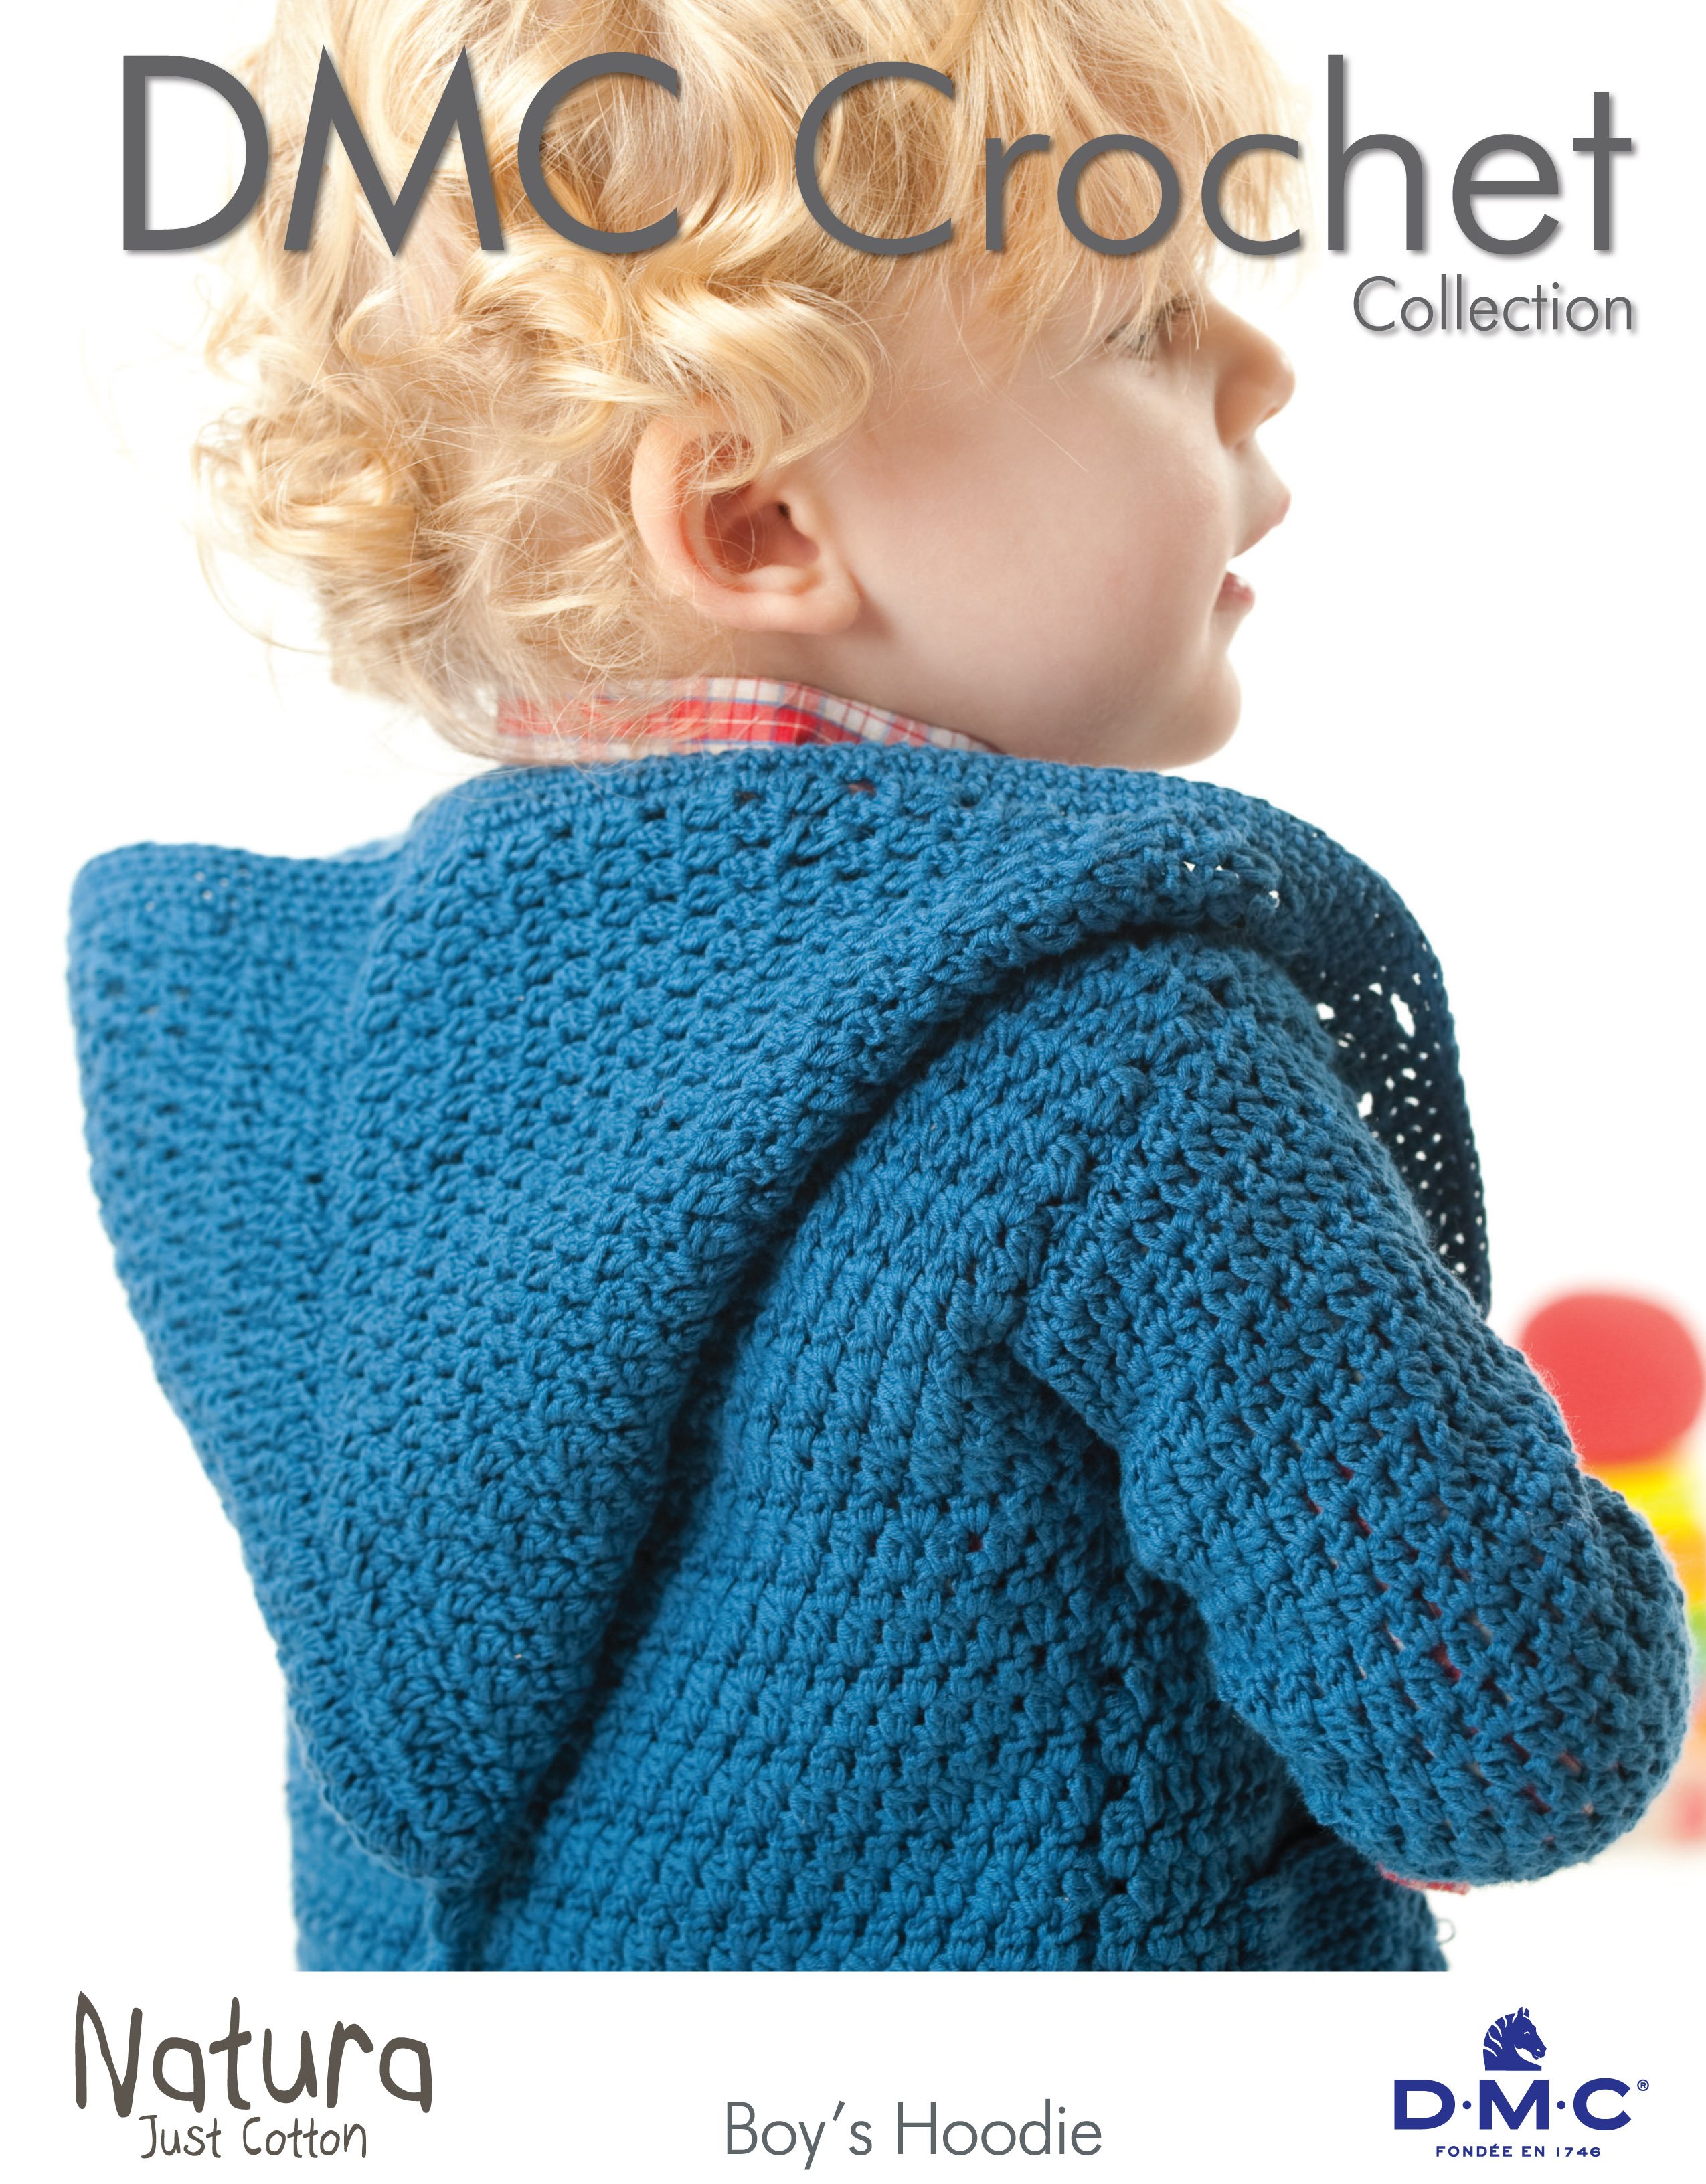 CHILD'S Nautical Cotton Sweater/Crochet Pattern INSTRUCTIONS ONLY 